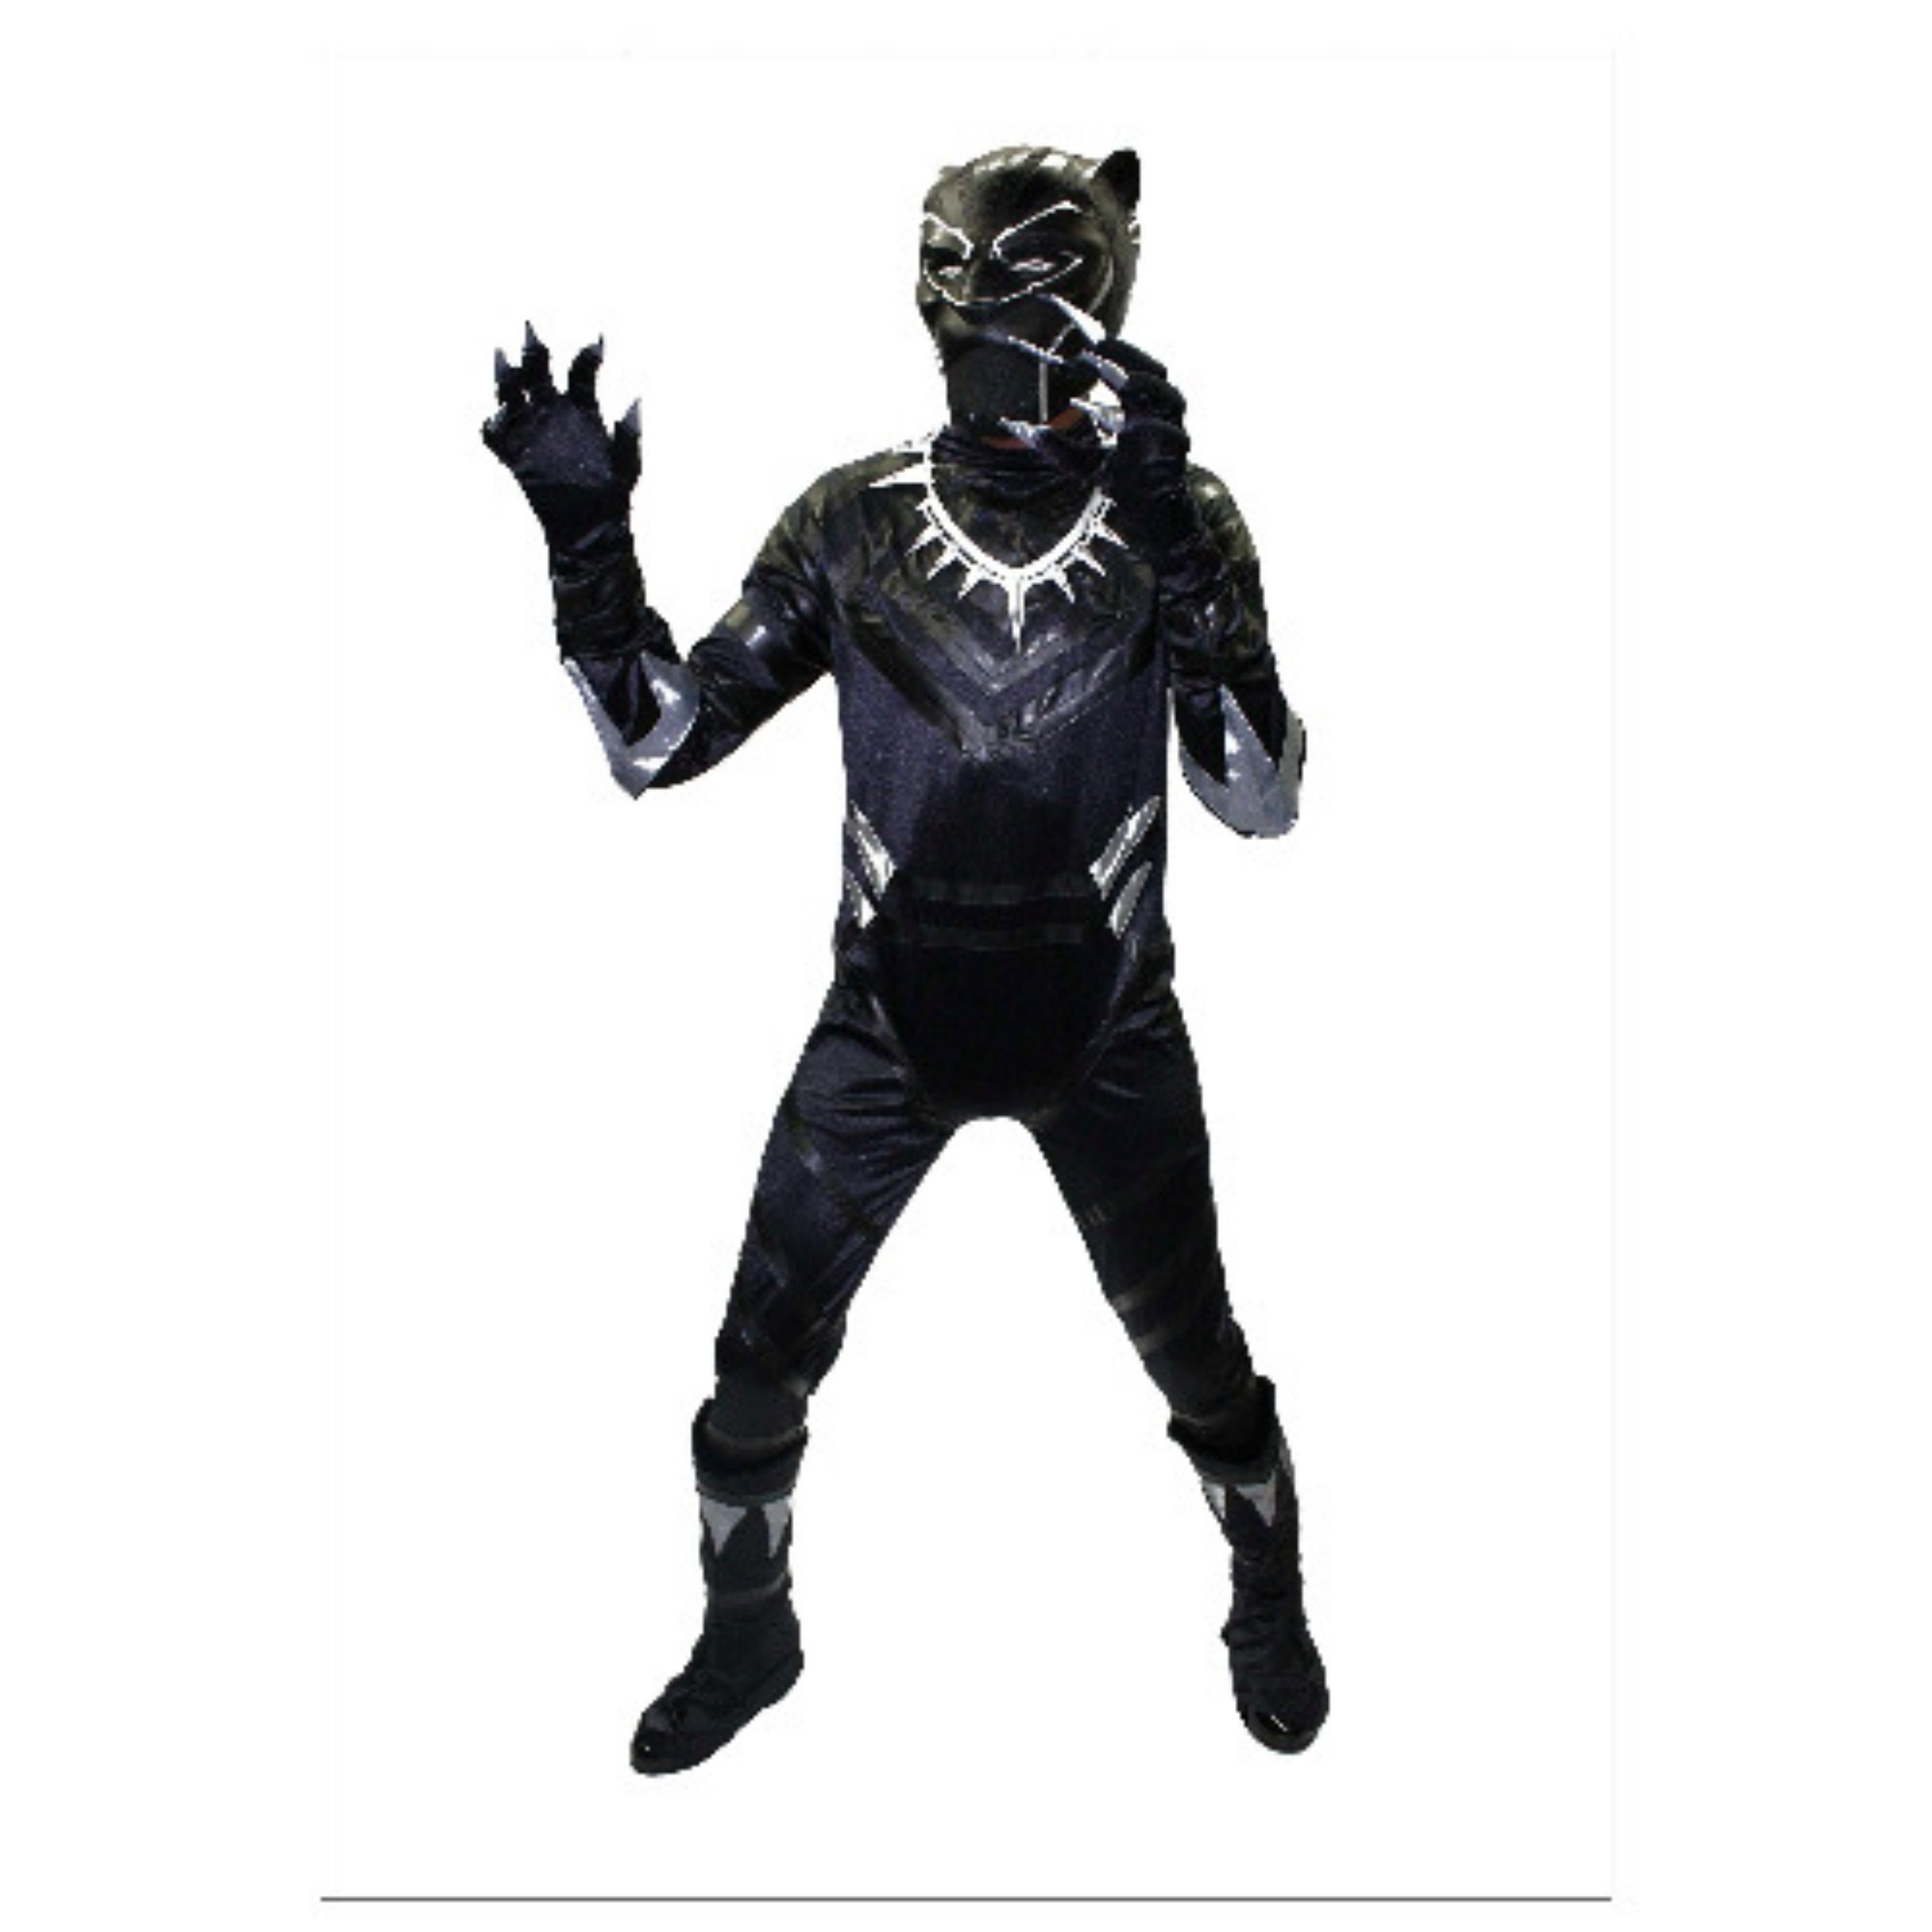 Deluxe Marvel Black Panther Costume w/ Boot Covers, Claws and Mask - Rent /  Small / Medium